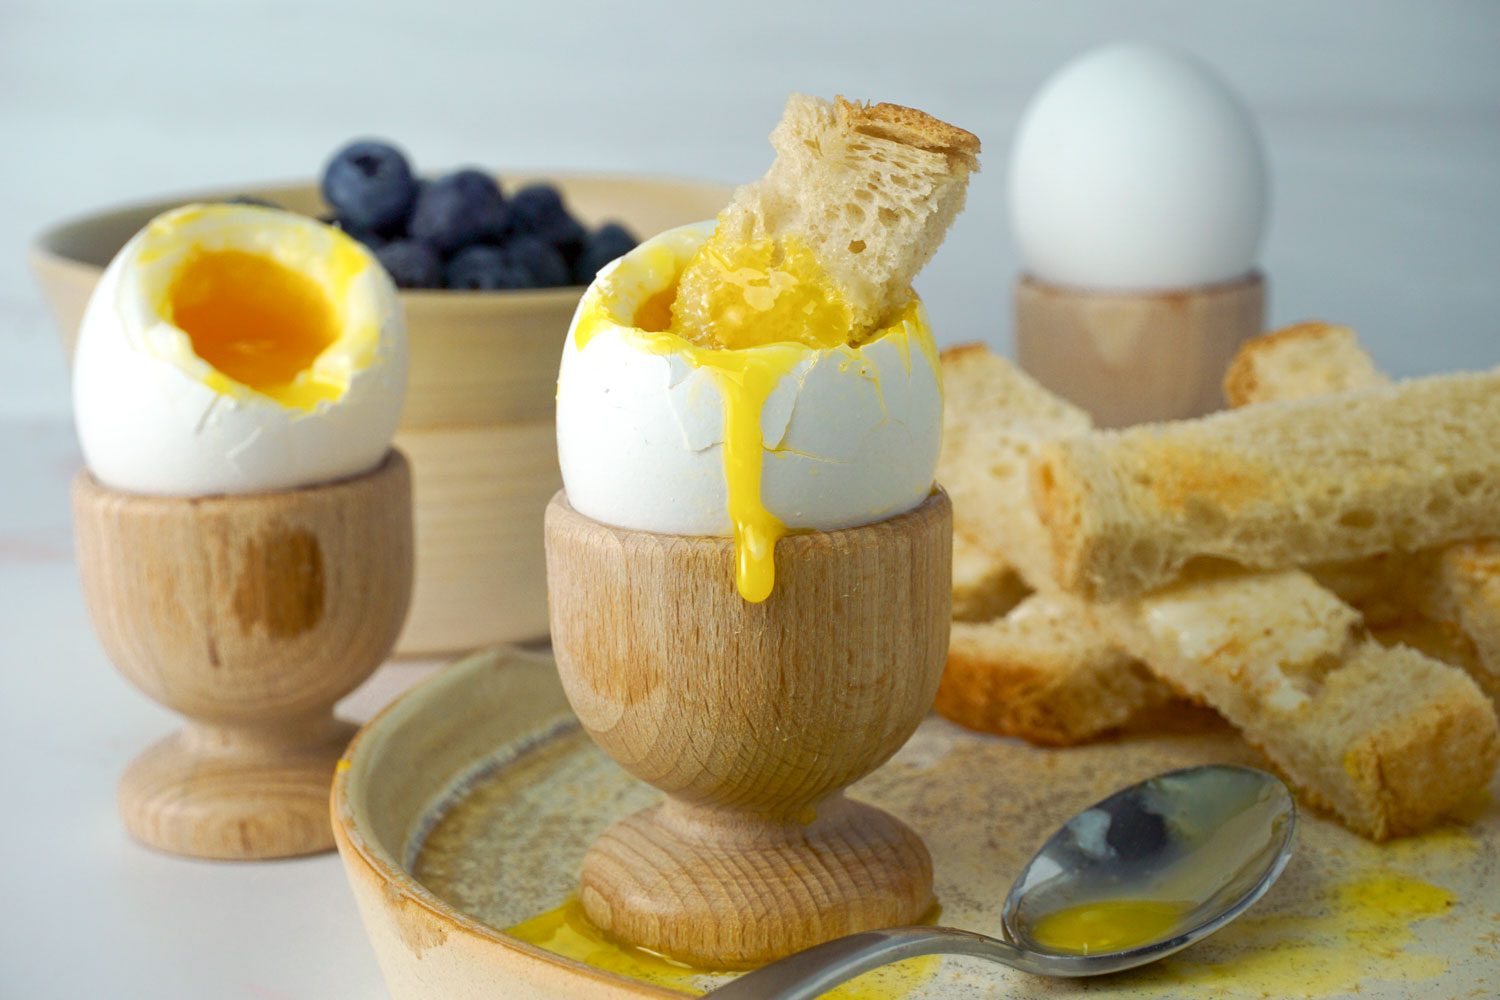 https://www.tasteofhome.com/wp-content/uploads/2023/09/Dipping-Toast-into-Dippy-Eggs-Lauren-Habermehl-for-Taste-of-Home-Resize-Recolor-Crop-DH-TOH.jpg